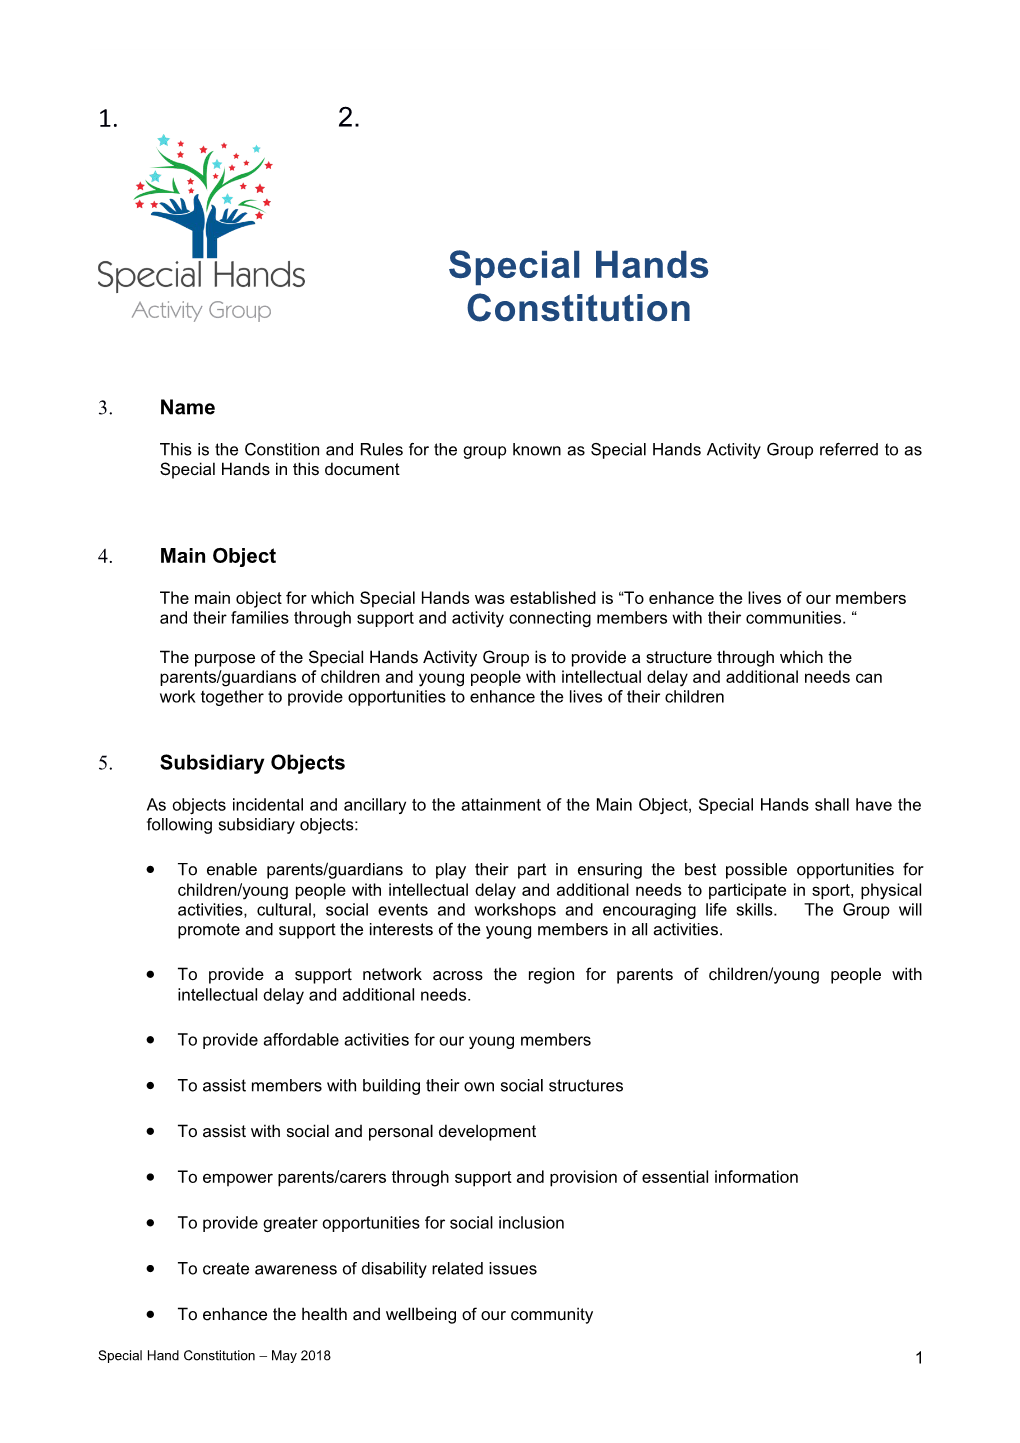 This Is the Constition and Rules for the Group Known As Special Hands Activity Group Referred